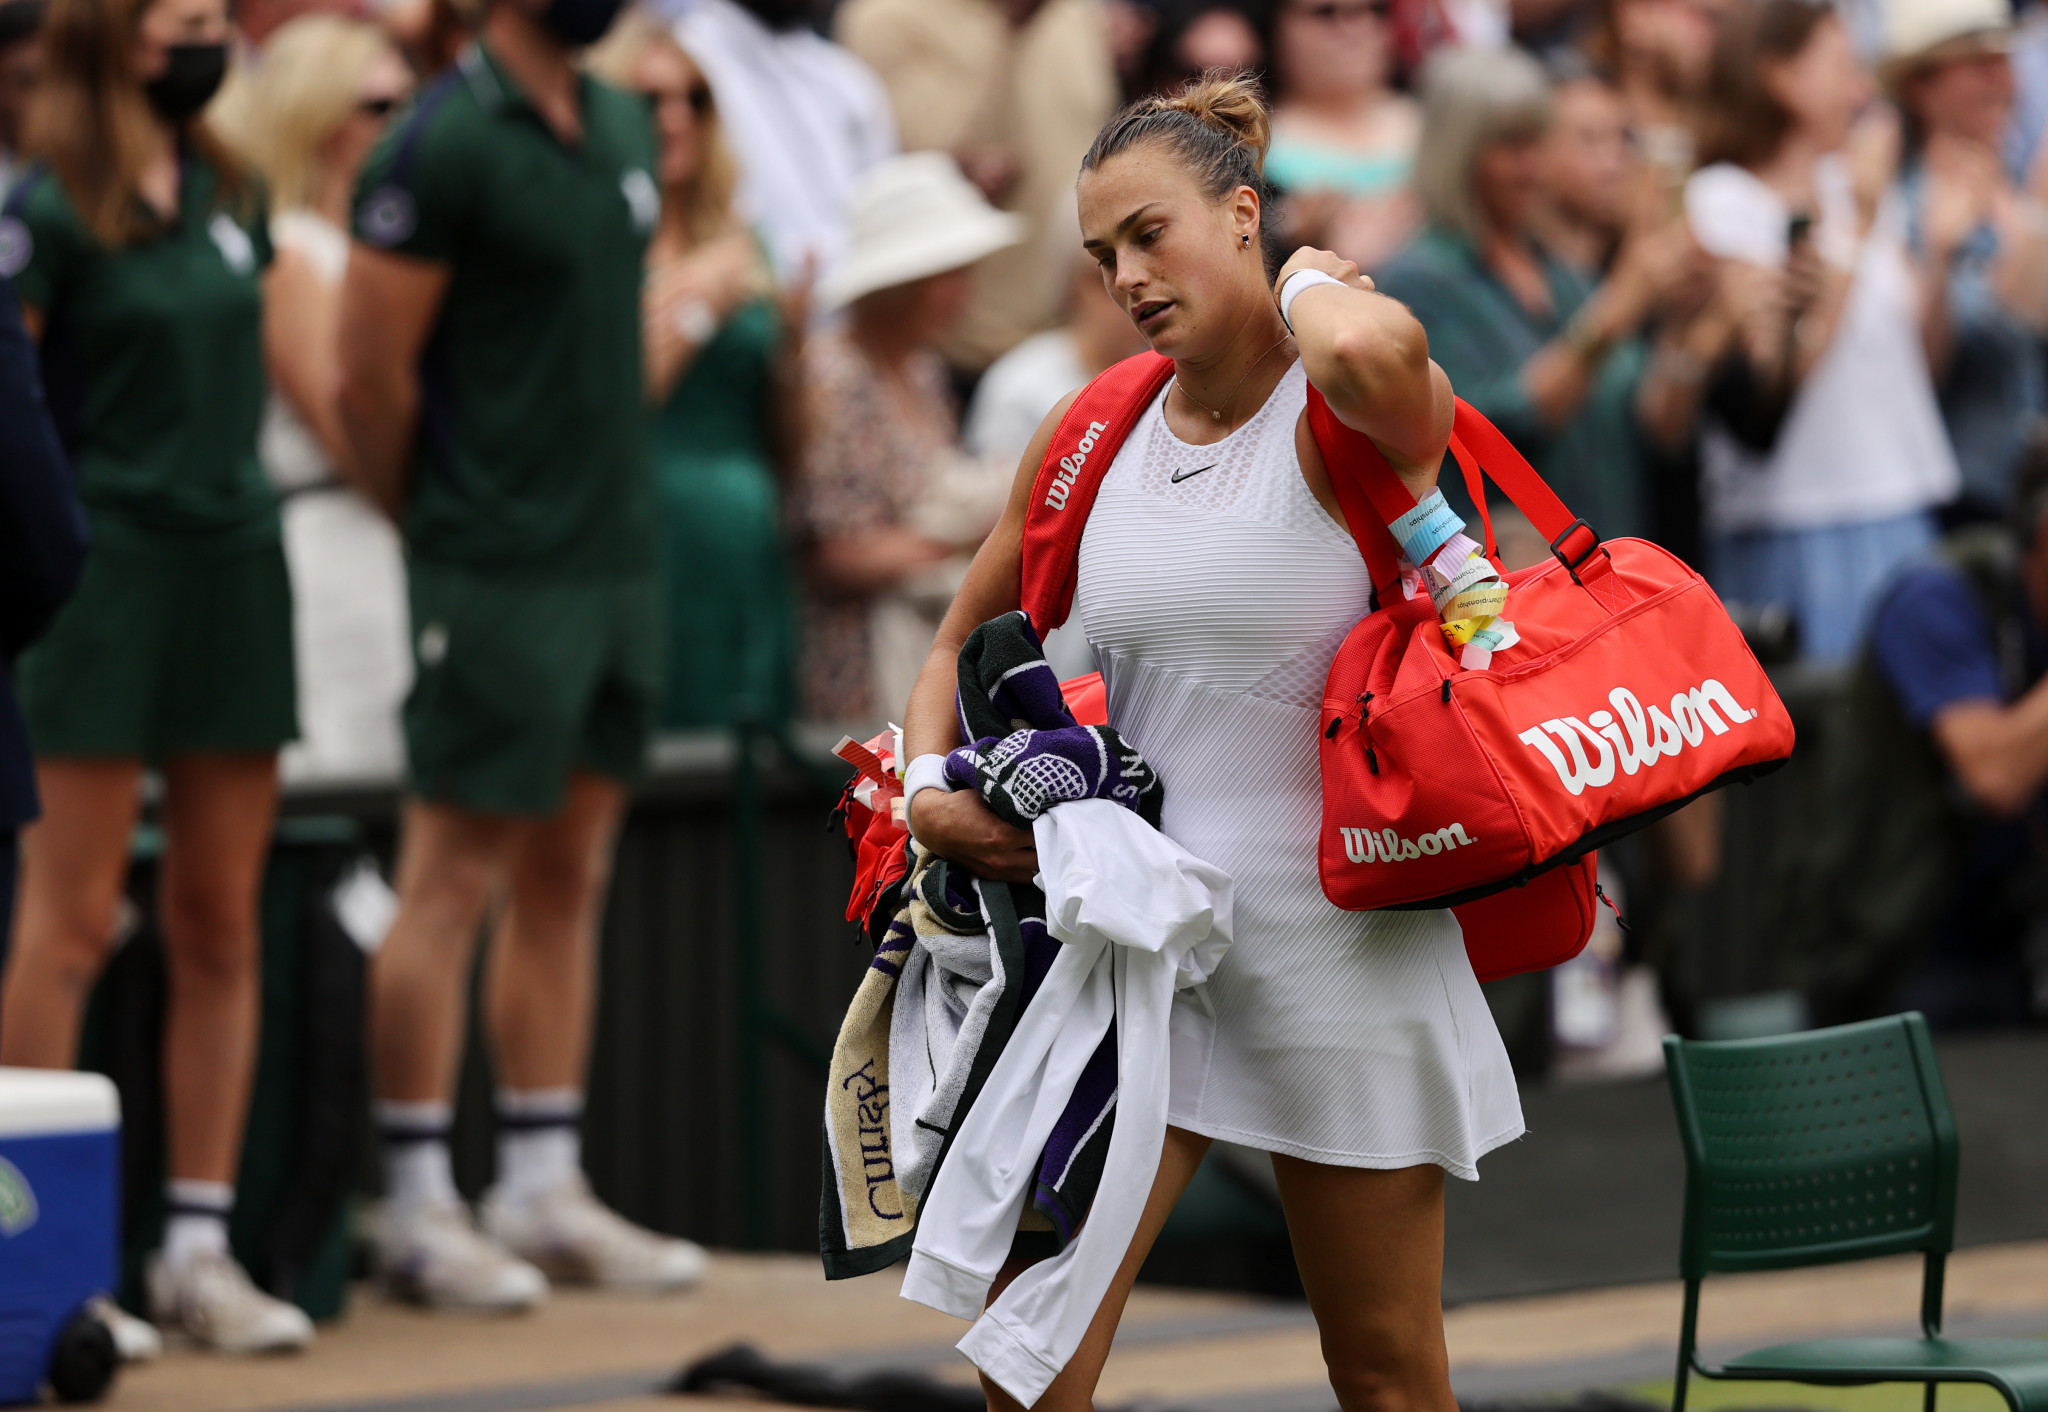 Aryna Sabalenka reached the semi-finals of Wimbledon last year, but will be unable to compete at the Grand Slam this season ©Getty Images